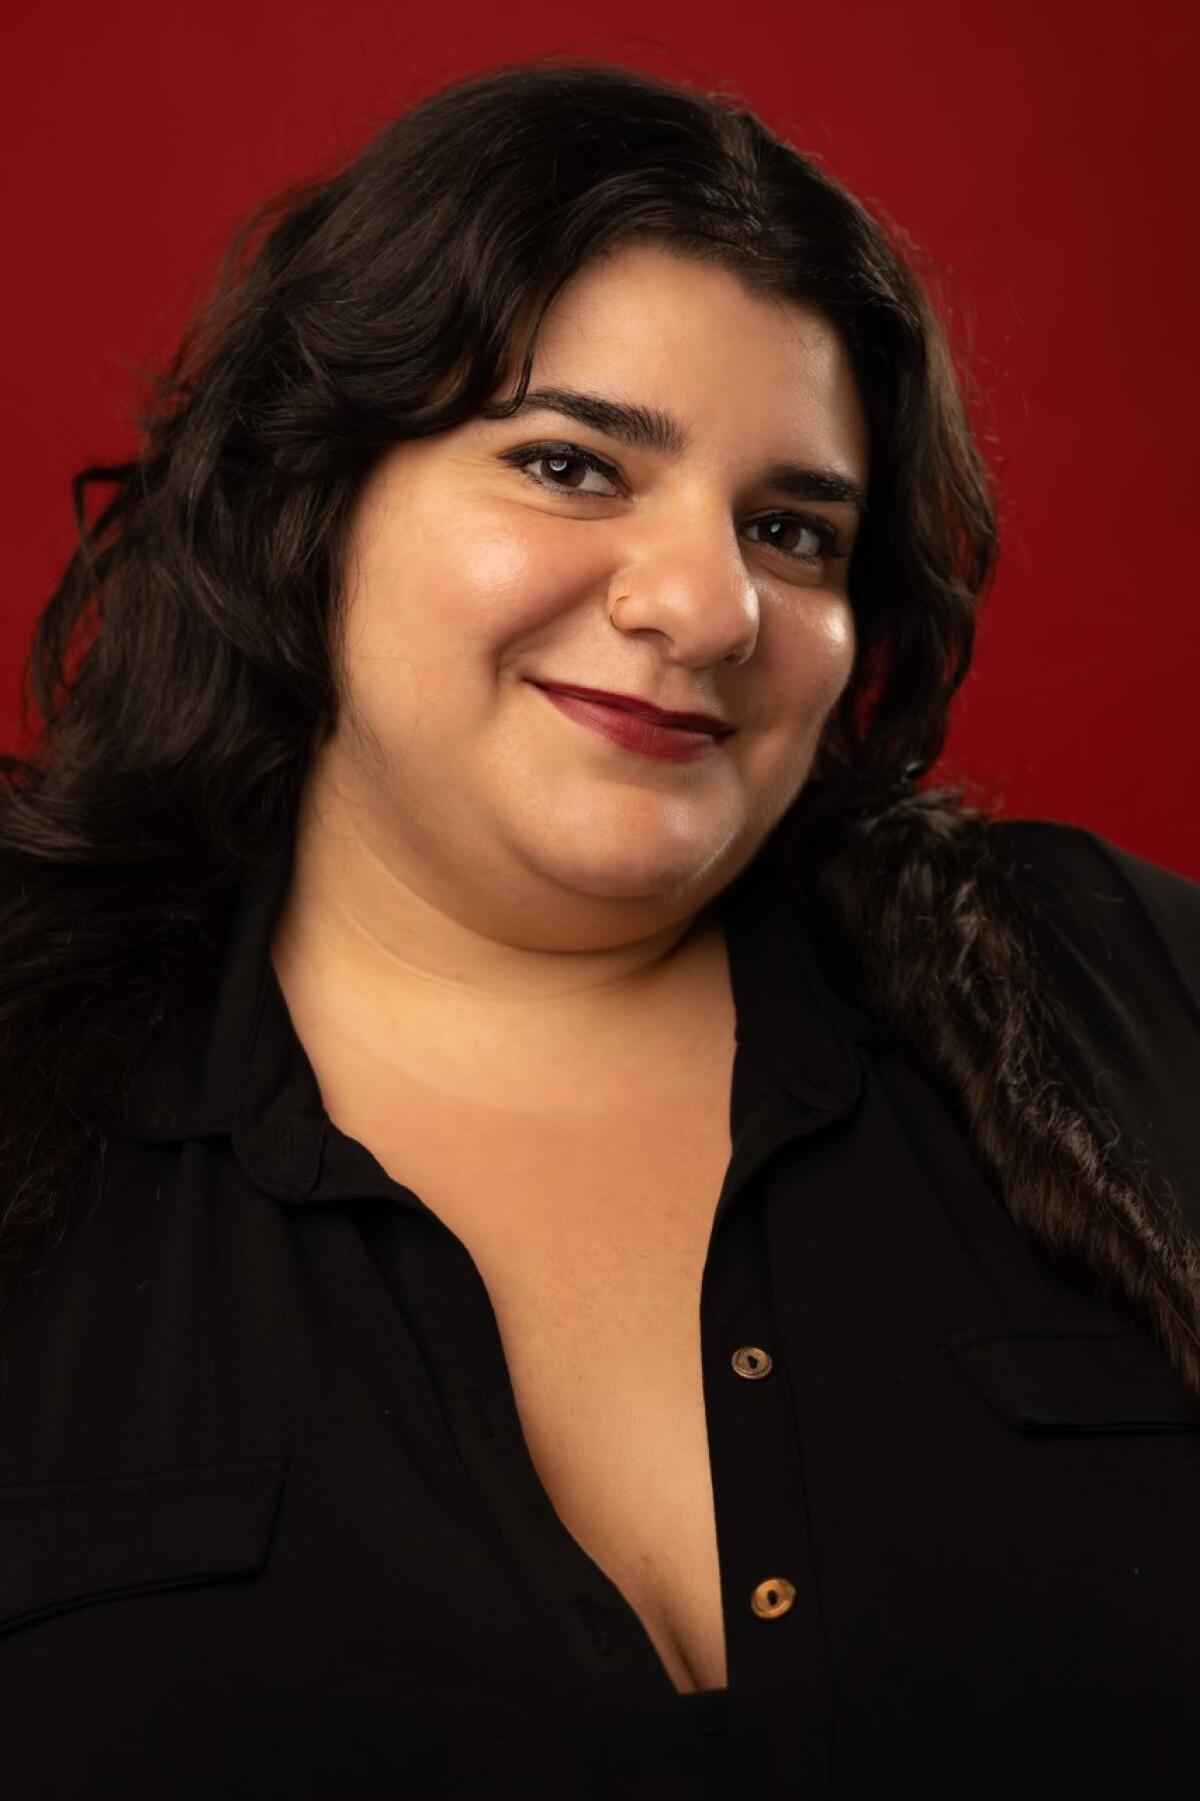 Mary Basmadjian will be performing her set as her character "Vartoush", a loudmouthed, stereotypical Armenian aunt